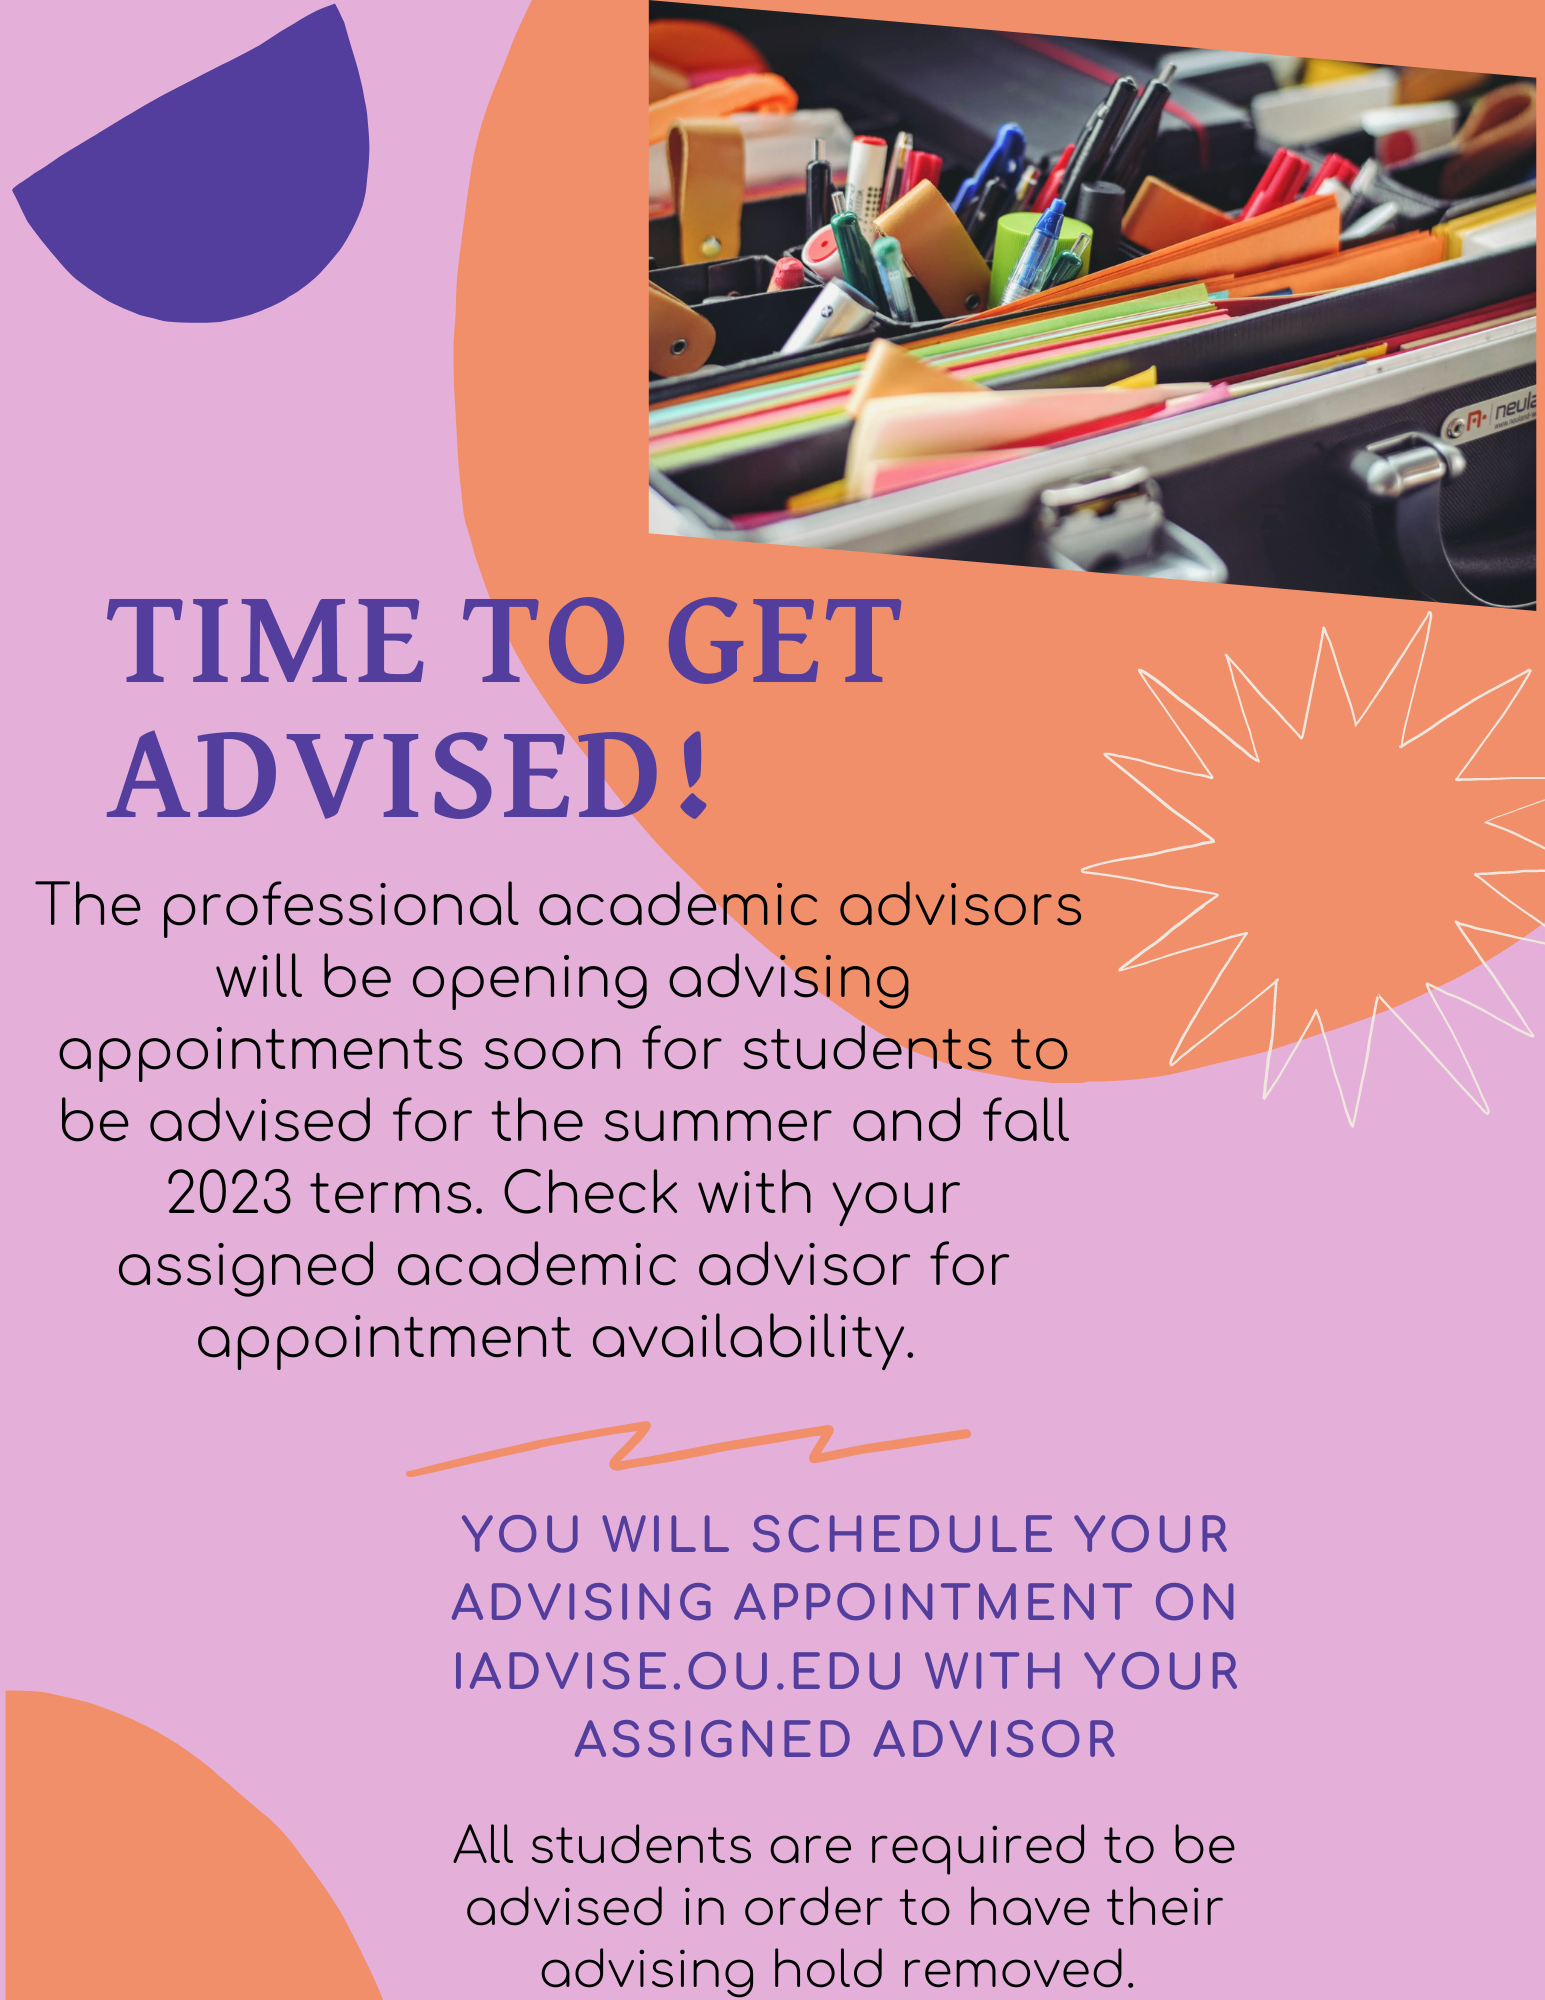 "TIME TO GET ADVISED!" The professional academic advisors will be opening advising appointments for students to be advised for the Spring 2022 semester. Check with your assigned academic advisor for appointment availability. You will schedule your advising appointment on iadvise.ou.edu with your assigned advisor. All students are required to be advised in order to have their advising hold removed.